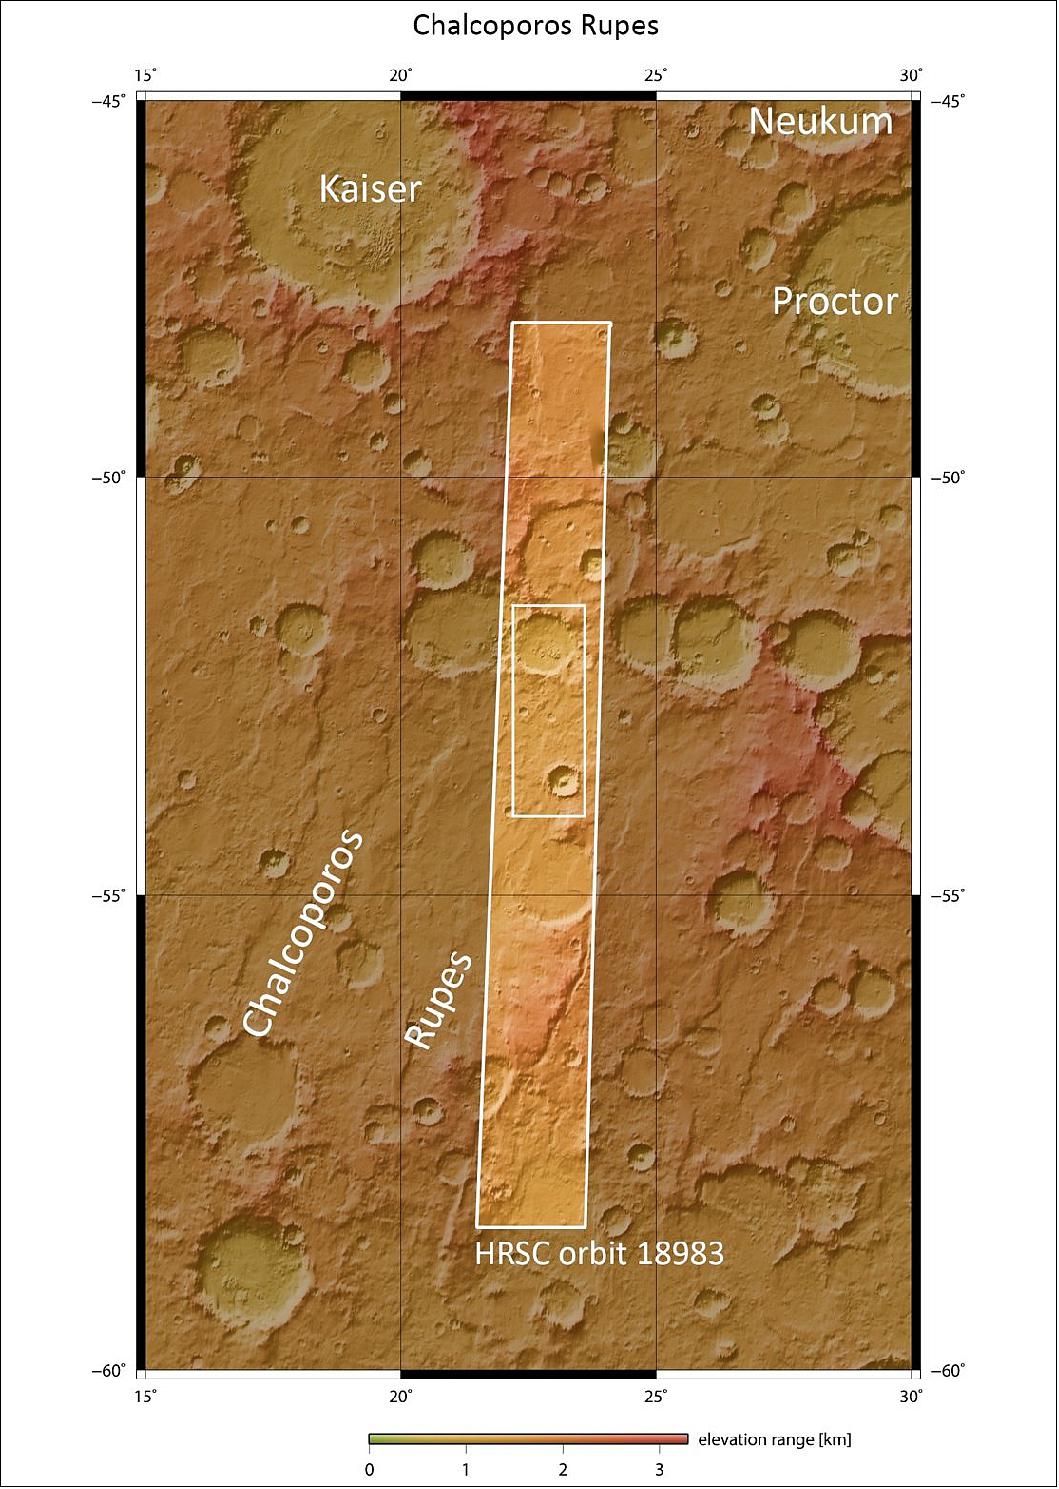 Figure 47: This image shows part of the Noachis quadrangle on Mars: Chalcoporos Rupes. The region outlined by the bold white box indicates the area imaged by the Mars Express High Resolution Stereo Camera on 3 January 2019 during Mars Express Orbit 18983. The ground resolution is approximately 13 m/pixel and the images are centered at about 23º East and 53º South (image credit: ESA/DLR/FU Berlin, CC BY-SA 3.0 IGO)